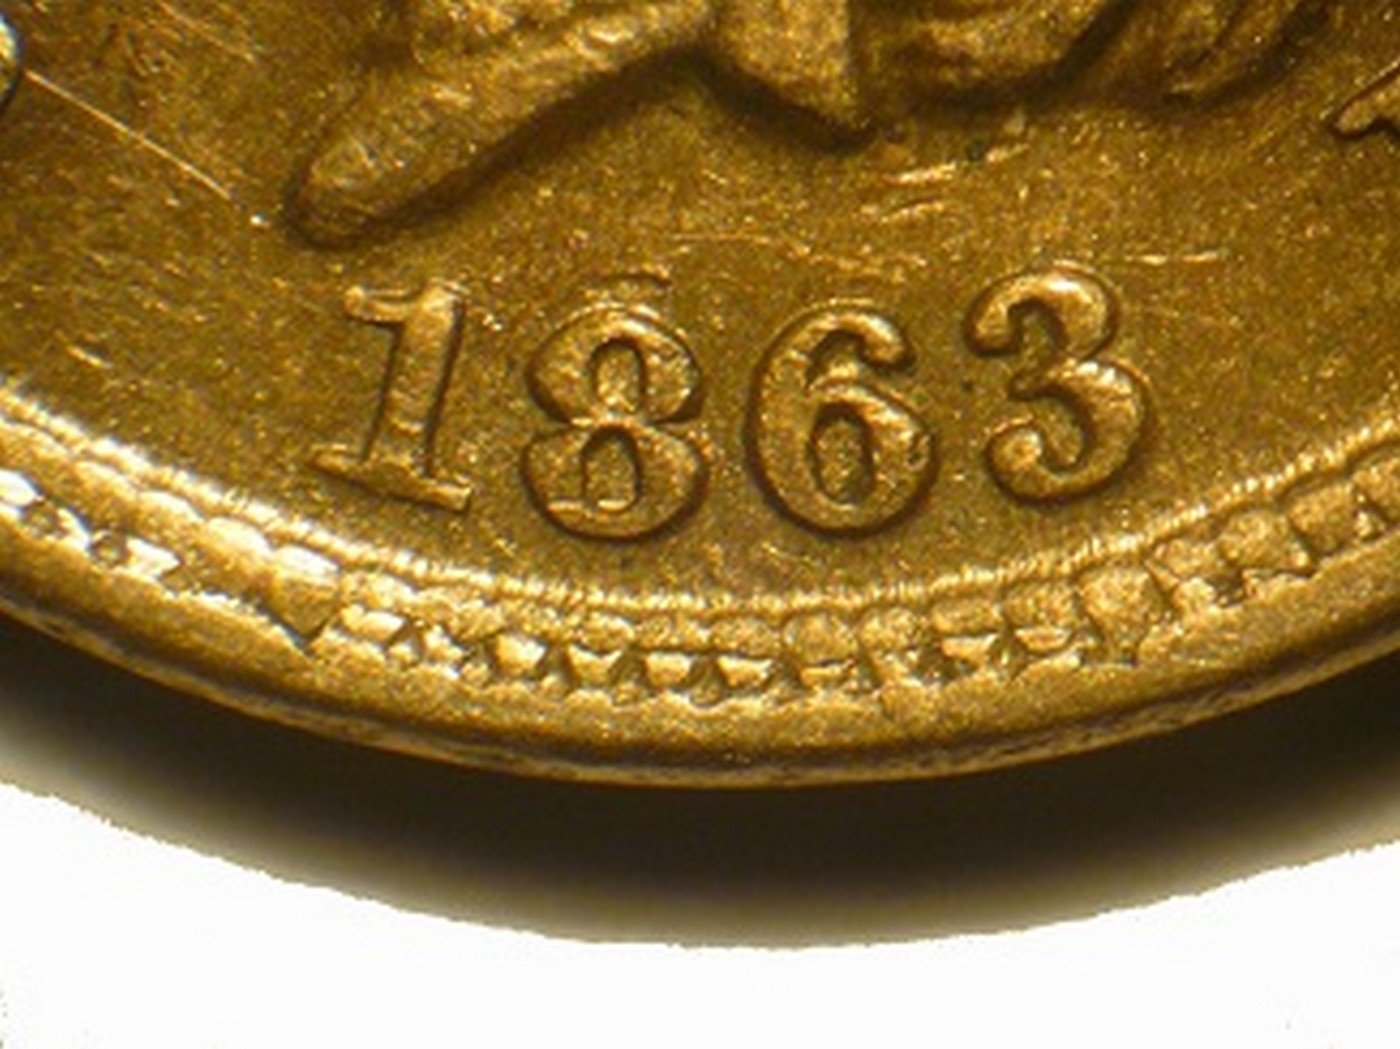 1863 Obverse of CRK-004 - Indian Head Penny - Photo by David Poliquin